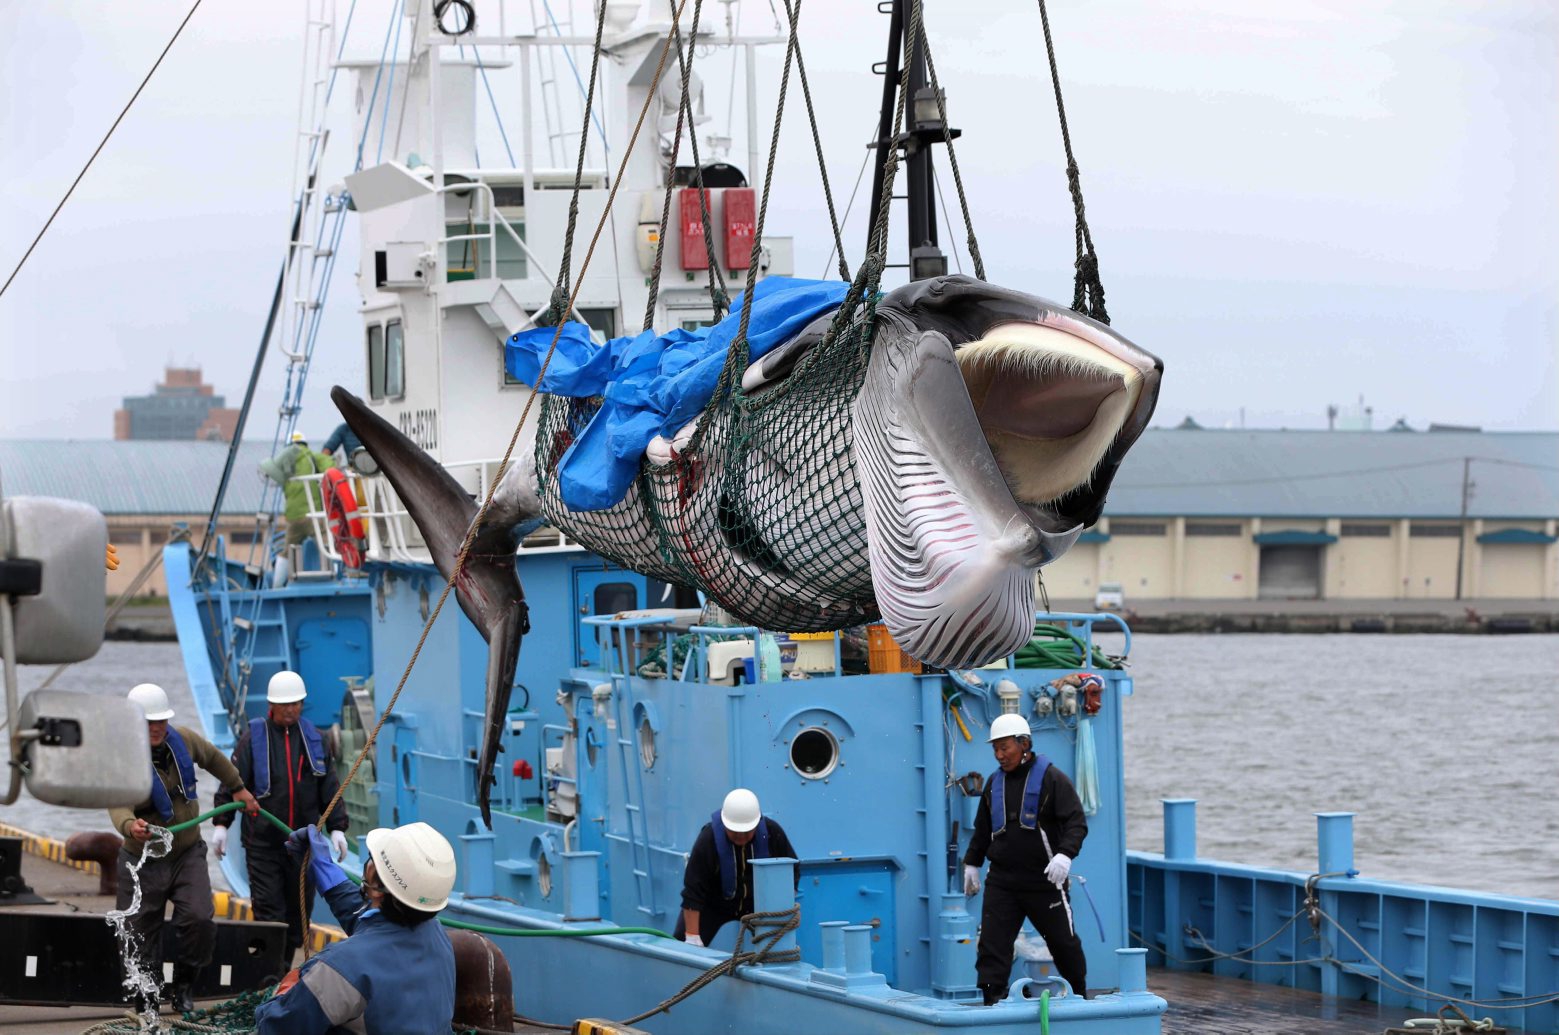 epa07686991 A minke whale is lifted off a boat after it was caught on the first day after the resumption of commercial whaling, in Kushiro, Hokkaido, Japan, 01 July 2019. Japan withdrew from the International Whaling Commission (IWC) on 30 June 2019 and began commercial whale hunt for the first time in 31 years.  EPA/JIJI PRESS / POOL JAPAN OUT EDITORIAL USE ONLY/  NO ARCHIVES  NO ARCHIVES  NO ARCHIVES  NO ARCHIVES JAPAN NATURAL RESOURCES WHALING